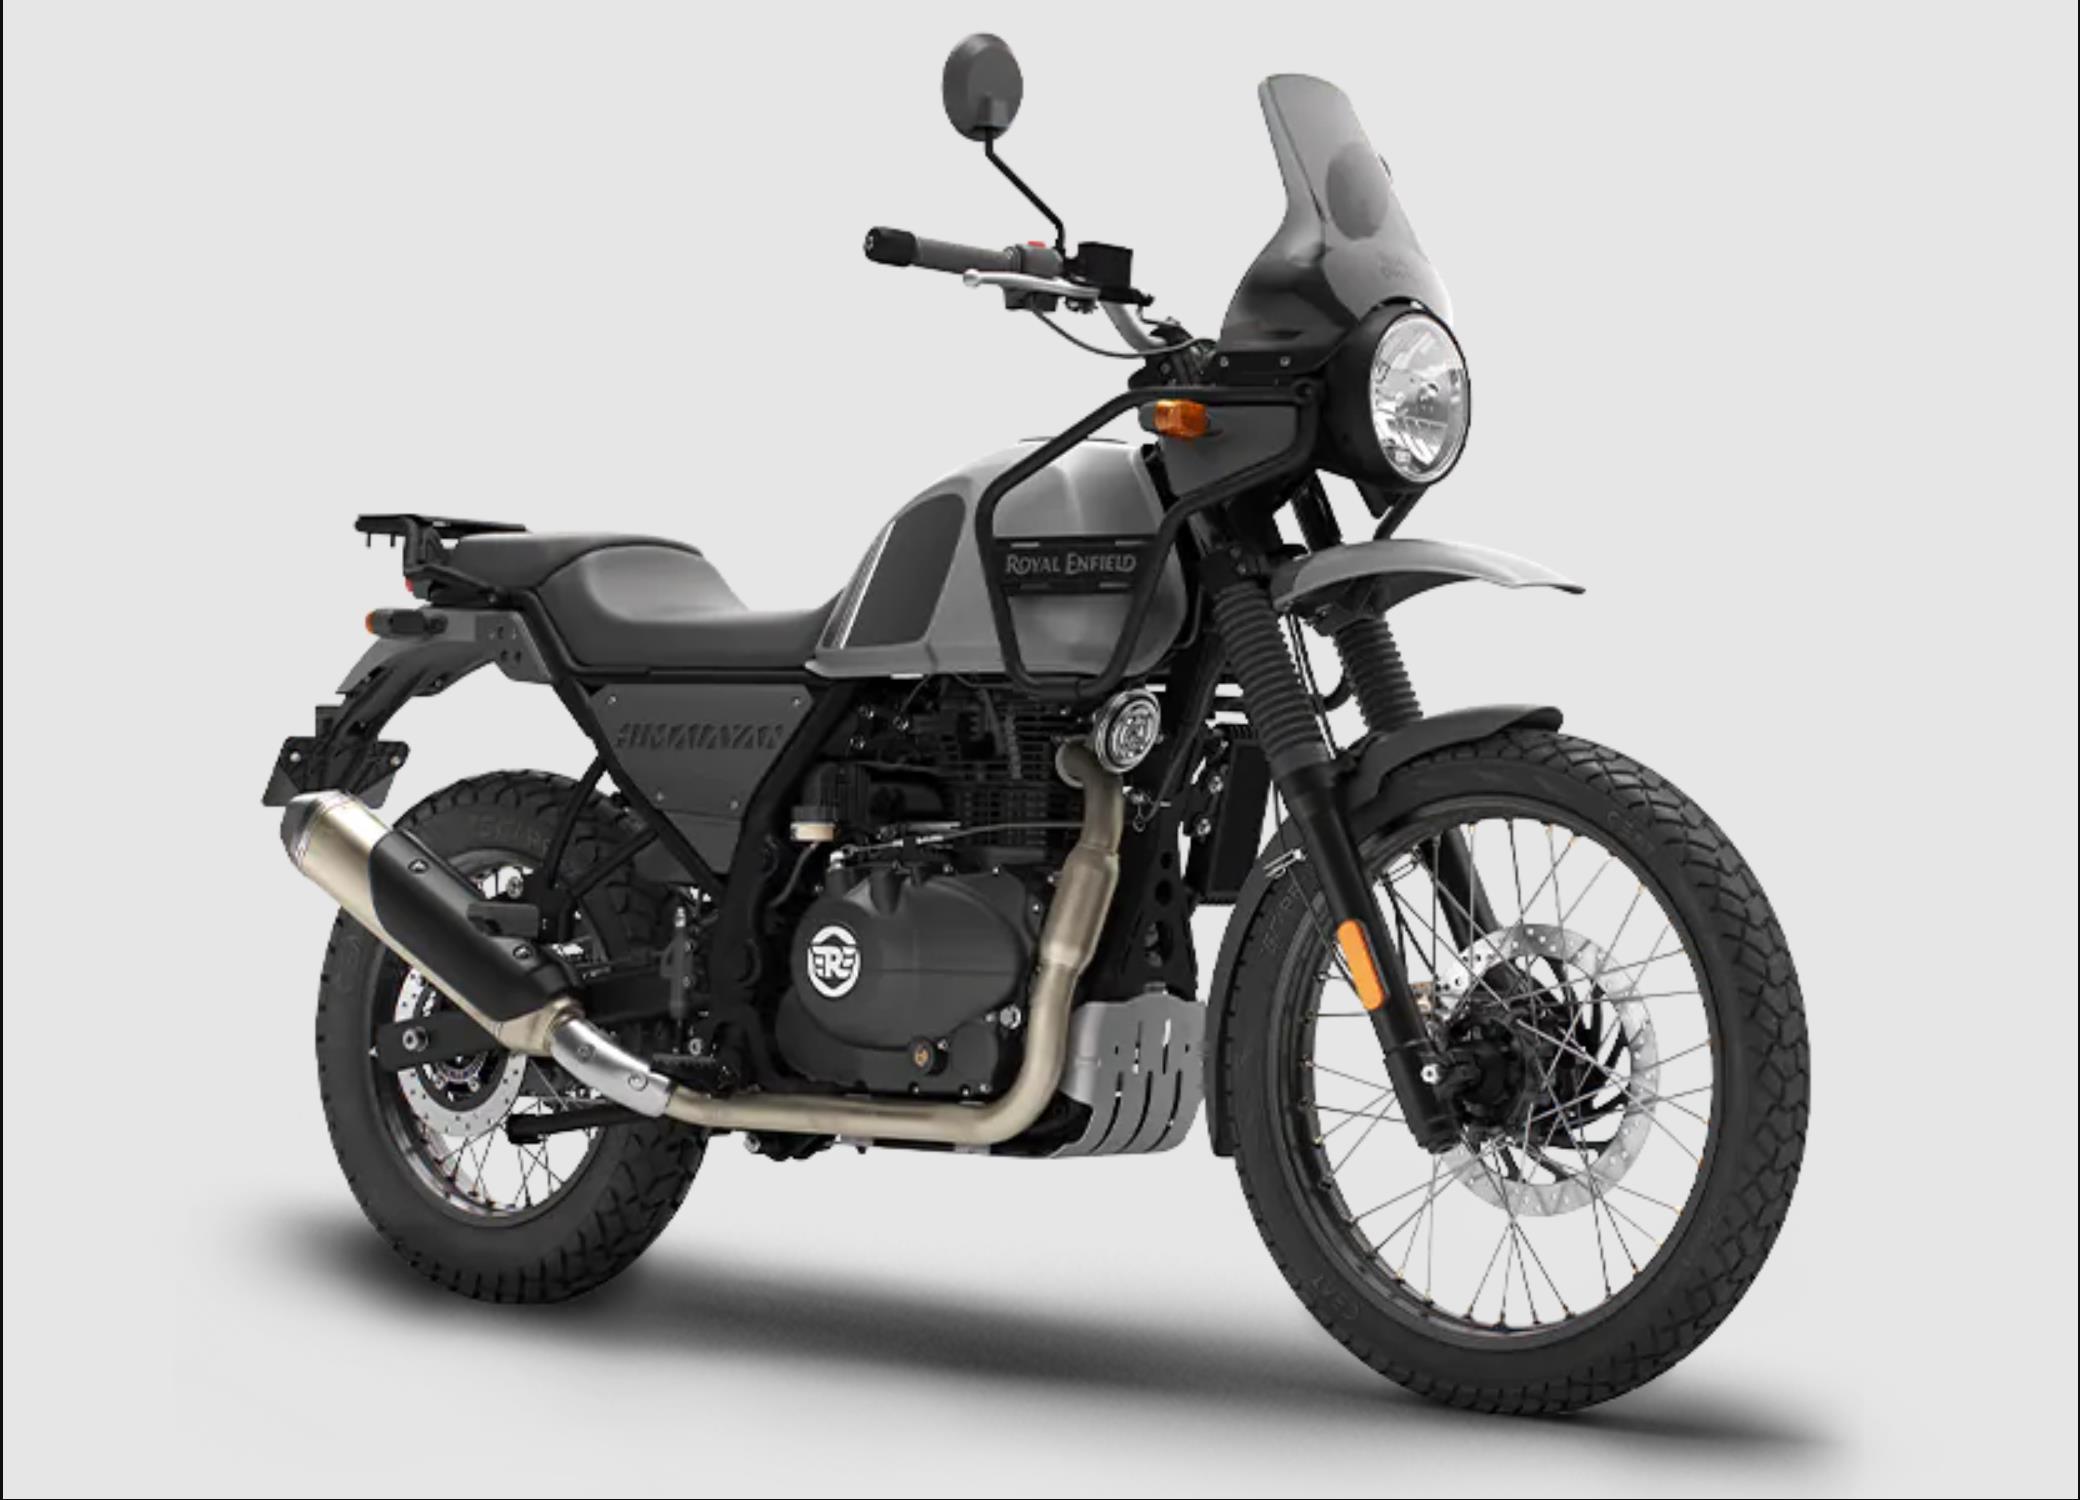 Royal Enfield Himalayan 411 Price, Specs, Top Speed & Mileage in India